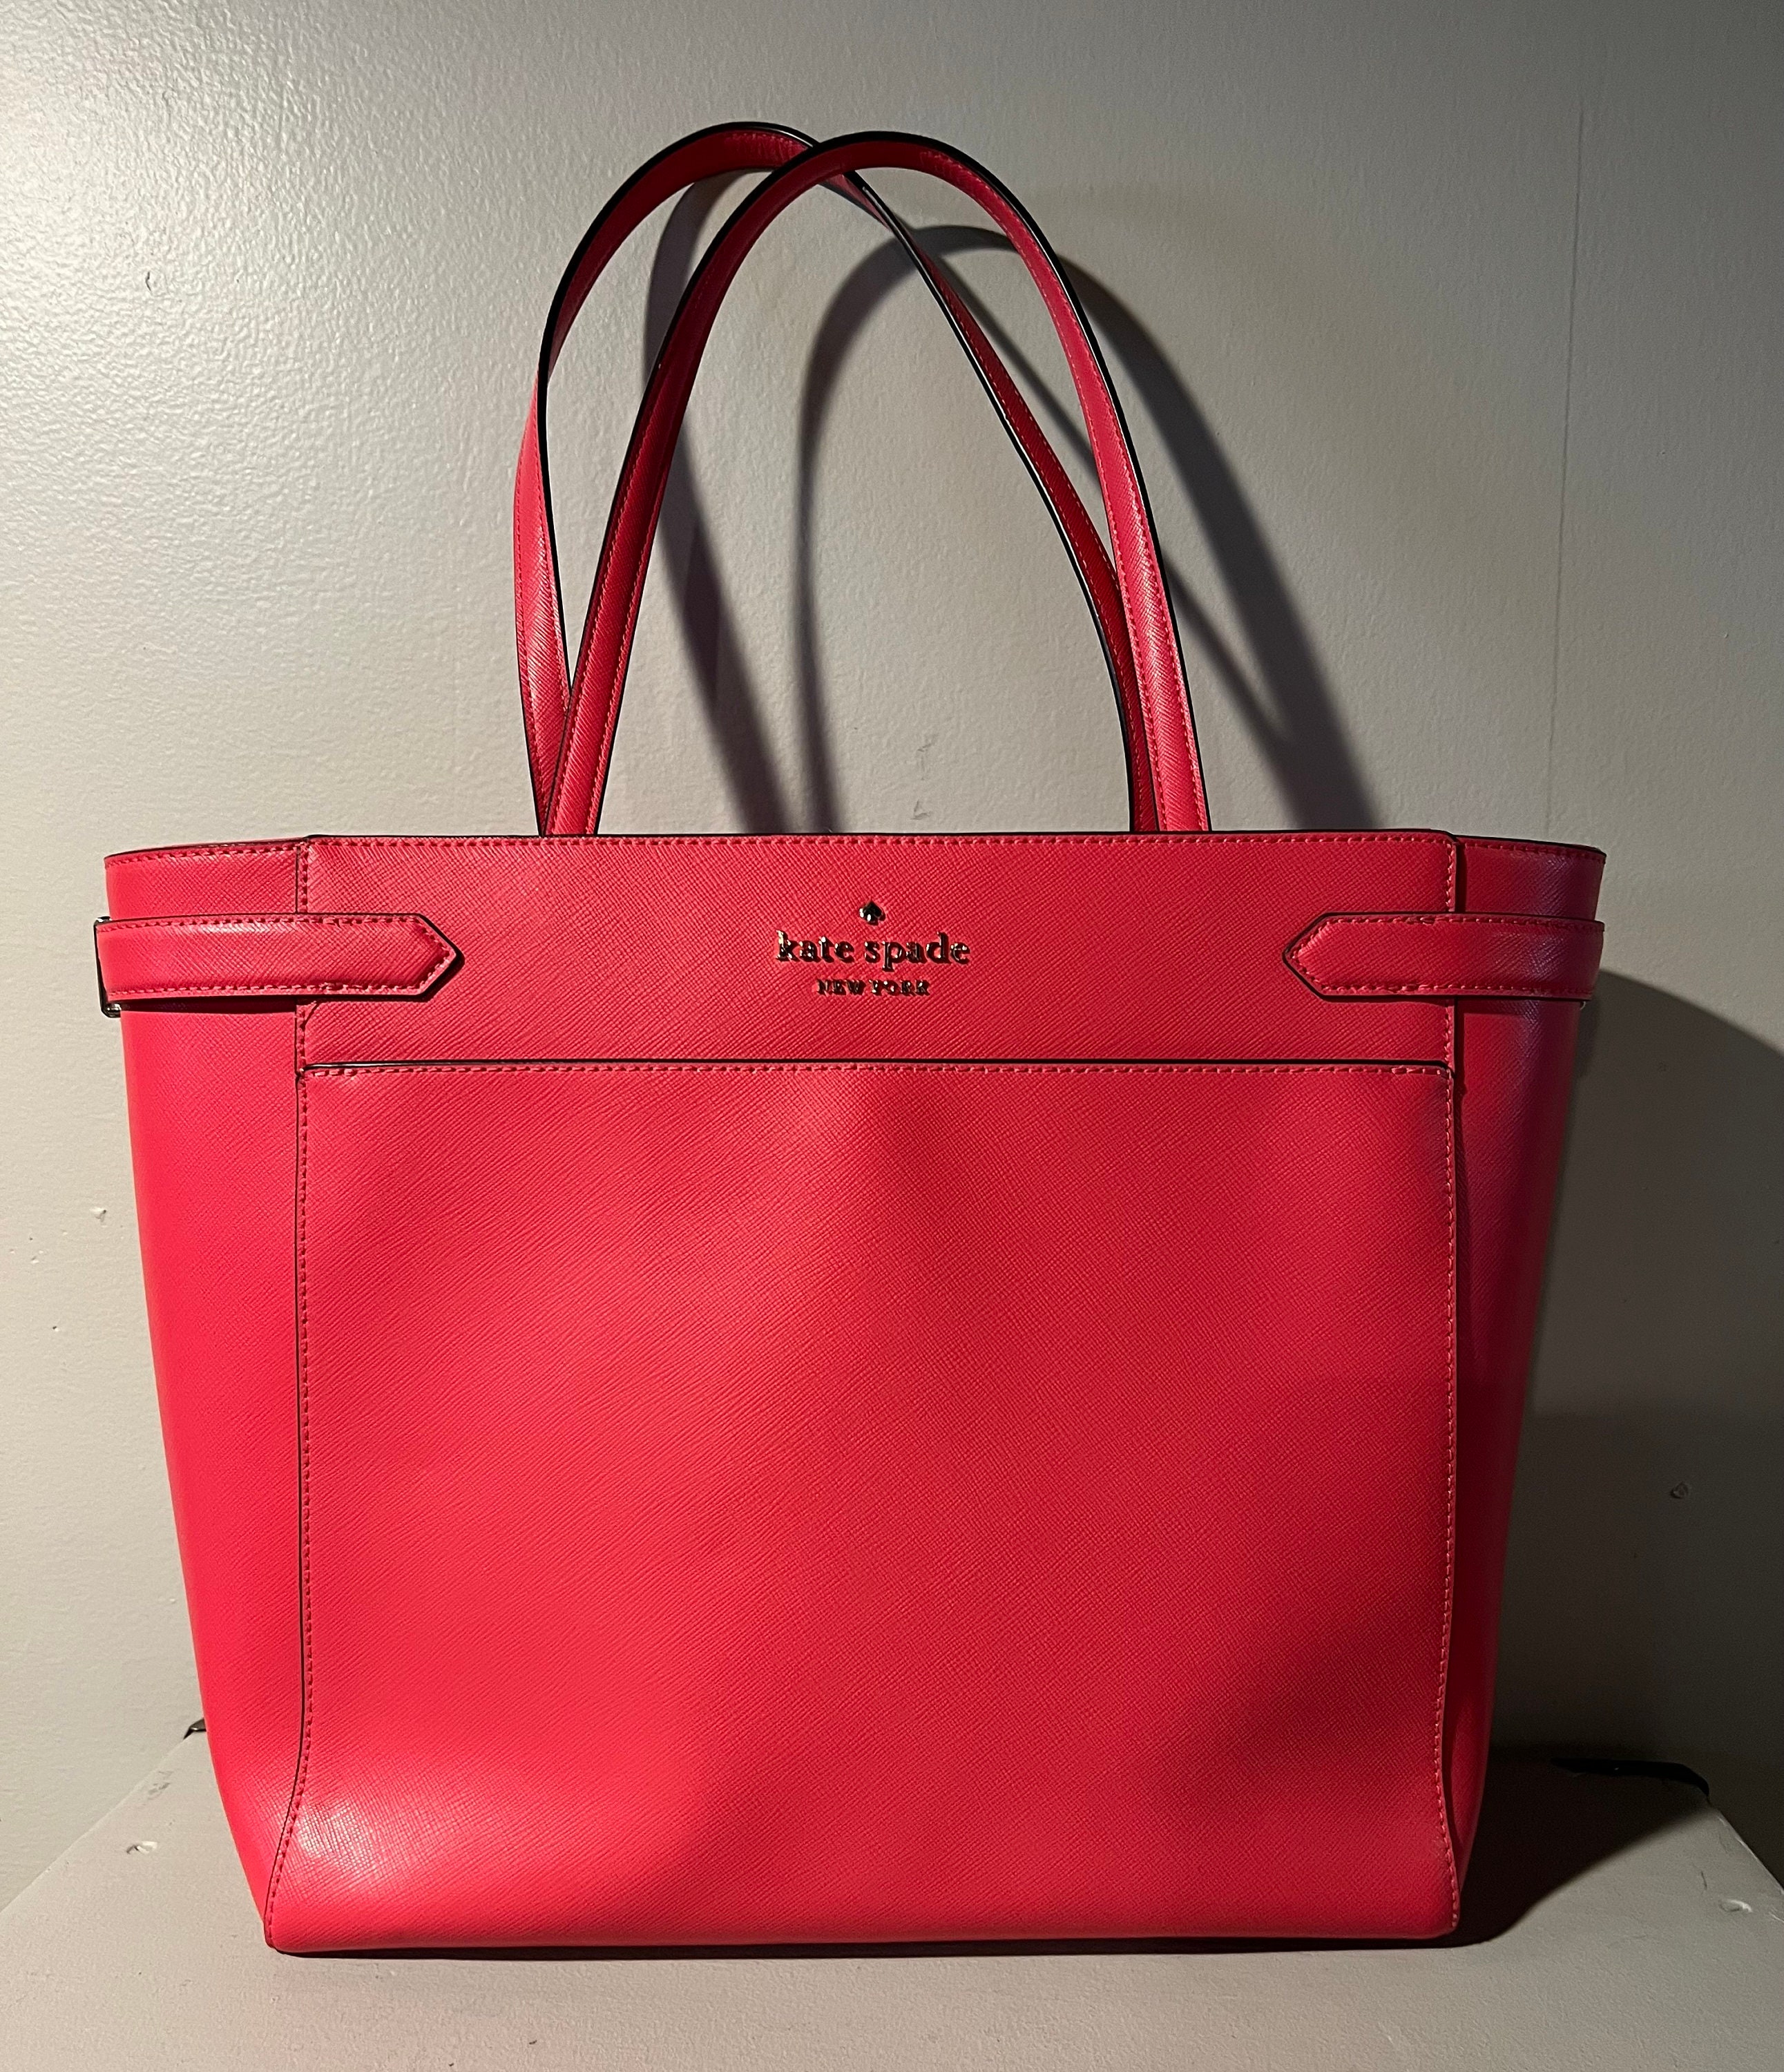  Kate Spade Staci Laptop Tote Triple compartment